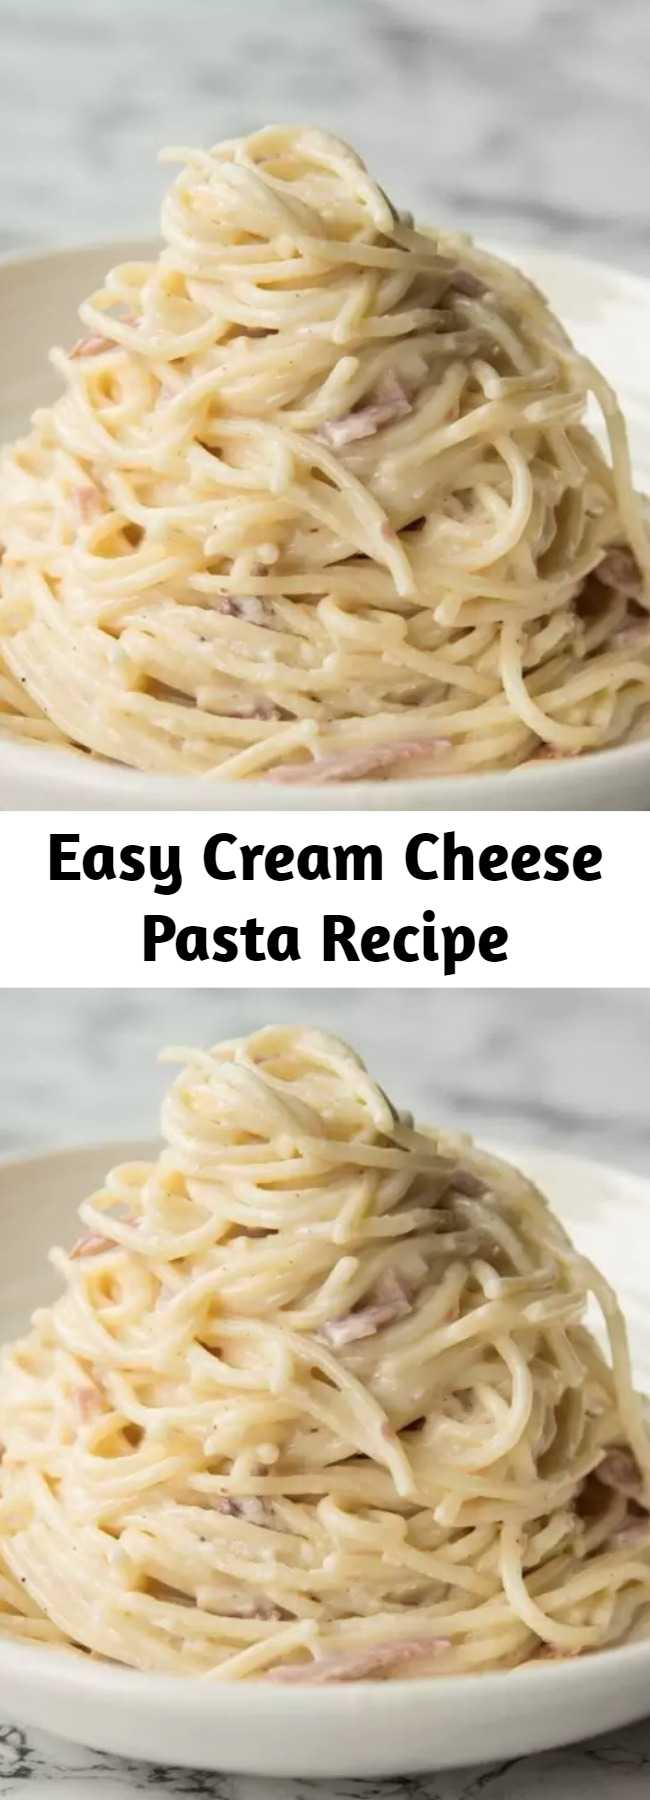 Easy Cream Cheese Pasta Recipe - Here I'll show you a secret tip to getting truly creamy Cream Cheese Pasta without the sauce drying up. With just 5 ingredients, this easy pasta dish is a total winner! #cream #cheese #creamcheese ##creamcheesepasta #pasta